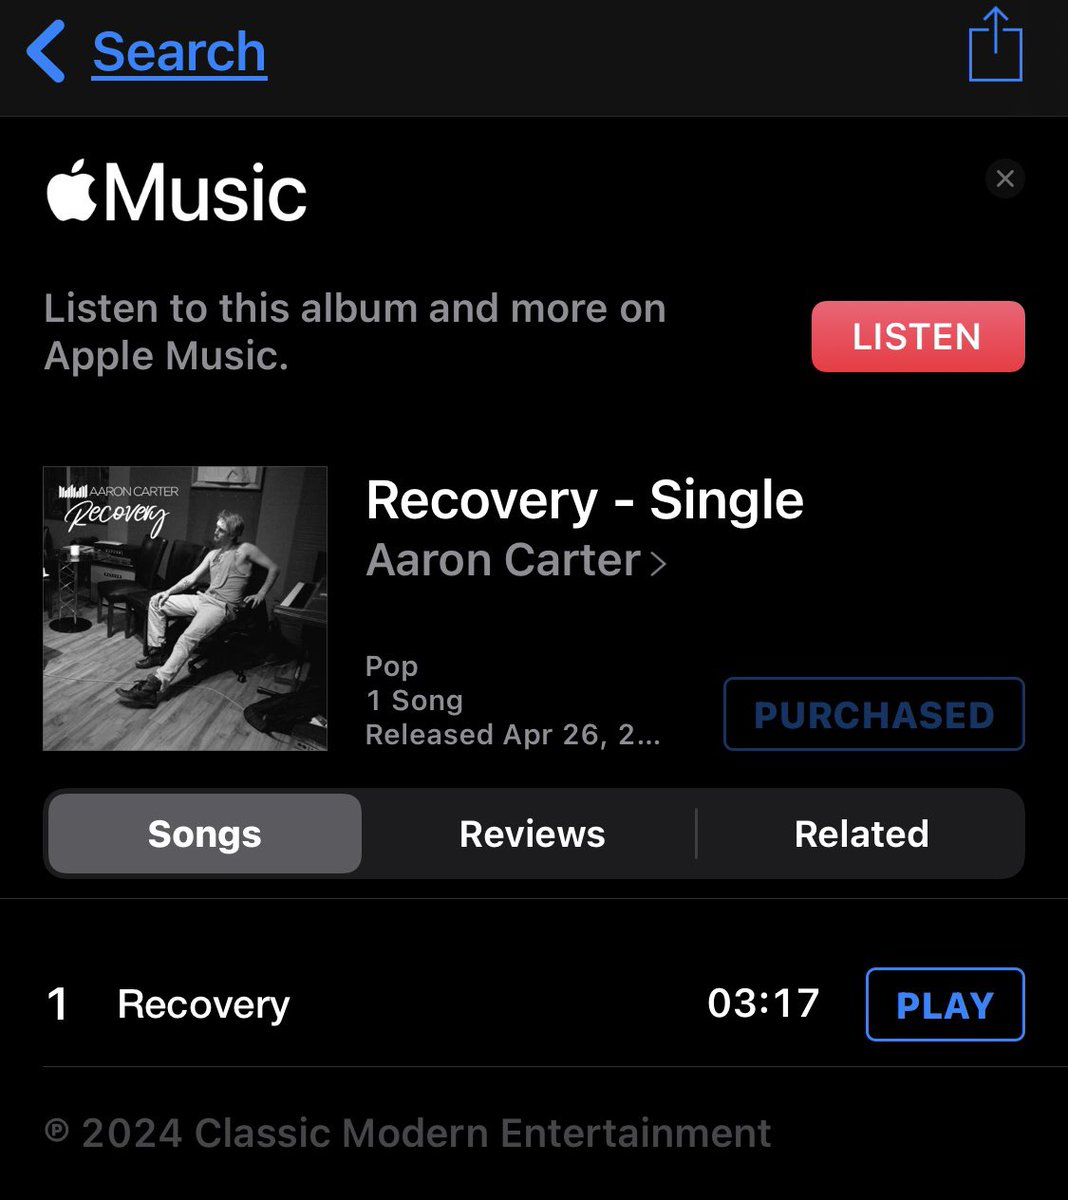 Today is bittersweet—my favorite #AaronCarter song, “Recovery,” is finally released🙌🏼 It has such a strong message✨Aaron always had so much passion & emotion when he sang it. “#Recovery” has helped me thru some tough times & still does. I’m so glad it’s out for the world now💖🎶